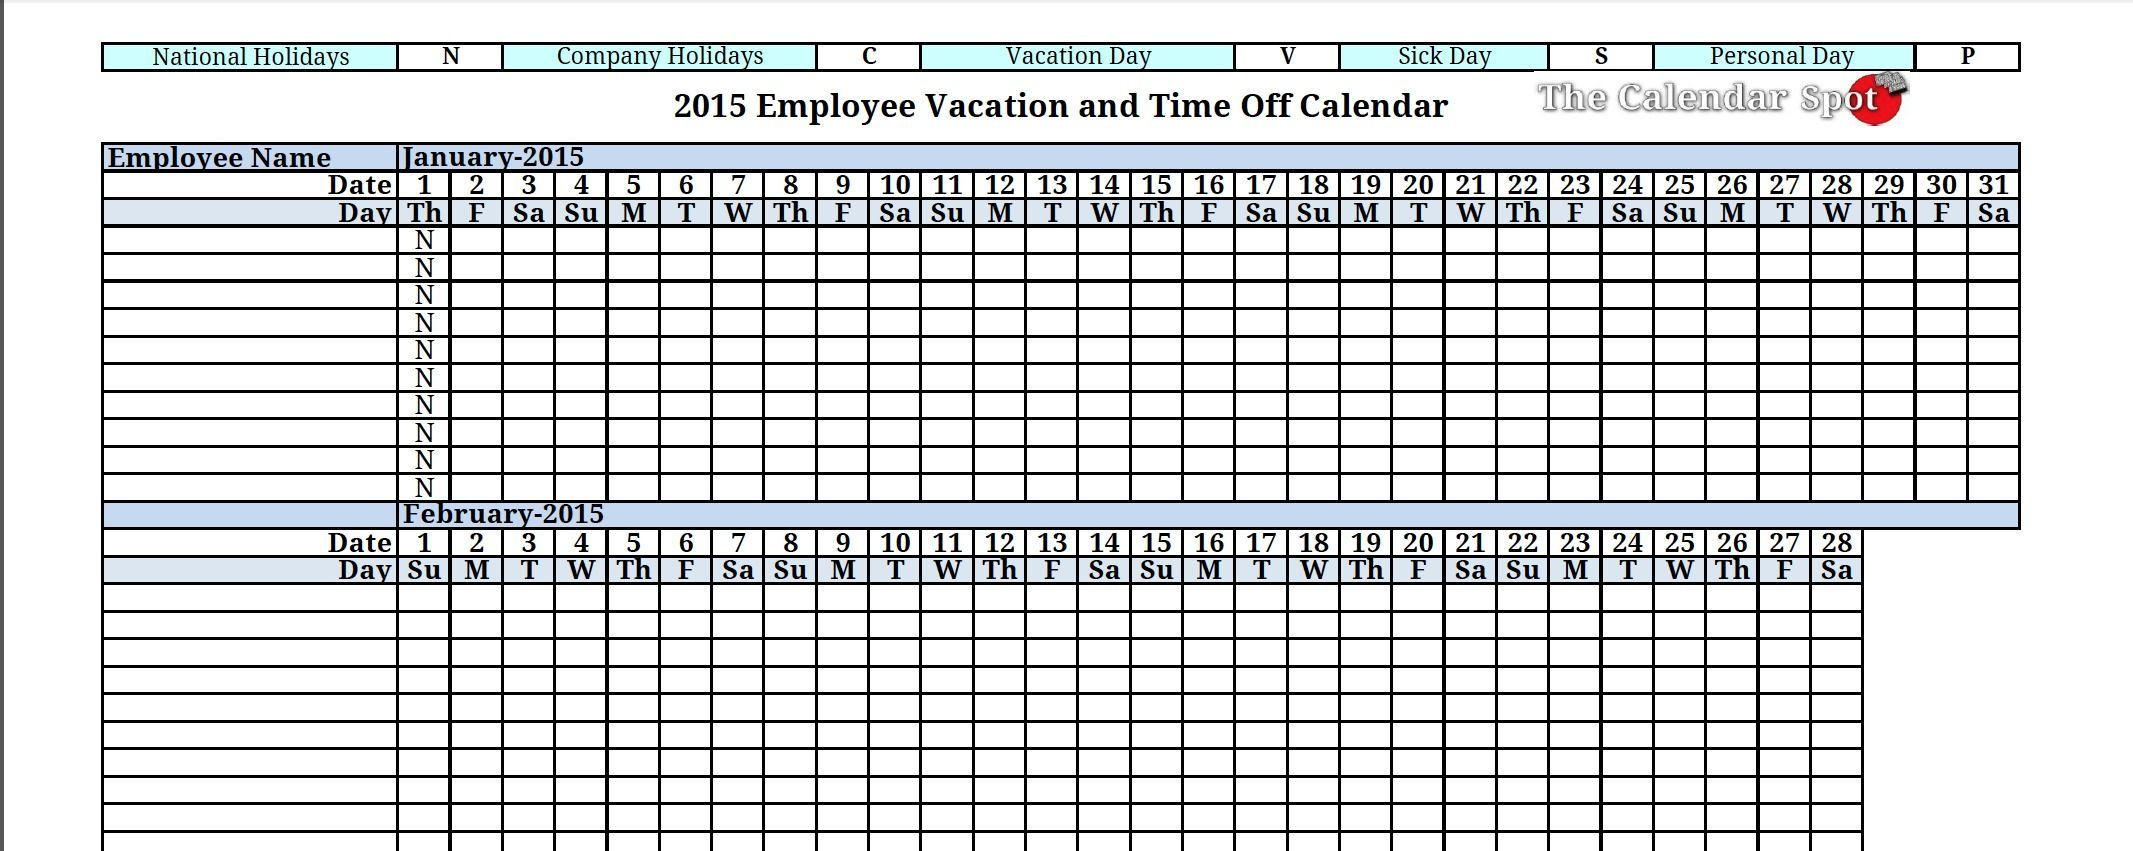 2015 Employee Vacation Absence Tracking Calendar, #Absence-Employee Vacation Calendar Excel 2021